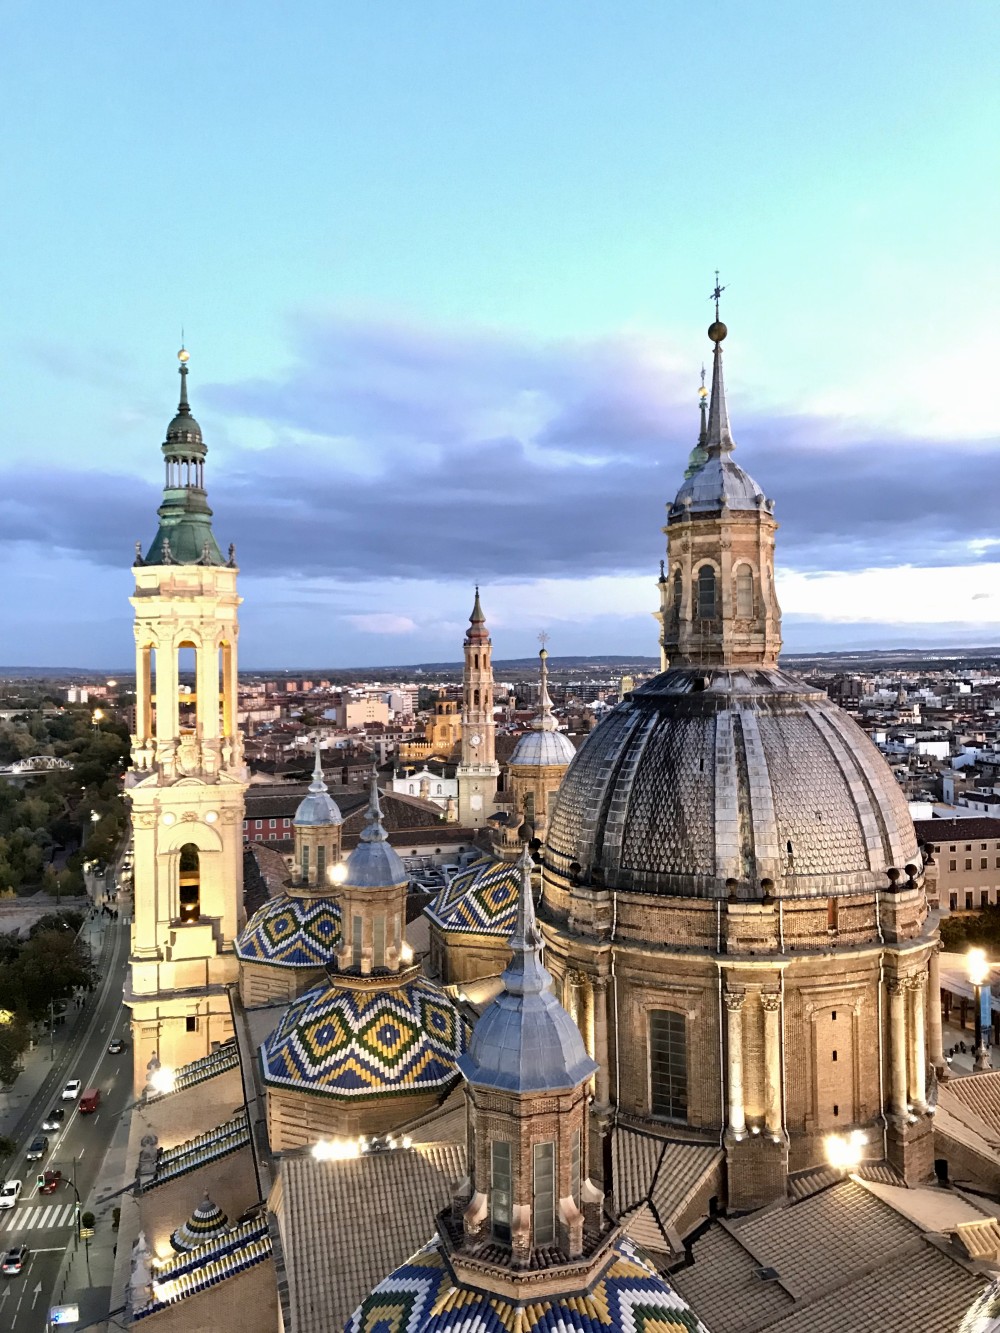 View of Zaragoza from one of the towers of the Cathedral-Basilica of Our Lady of the Pillar